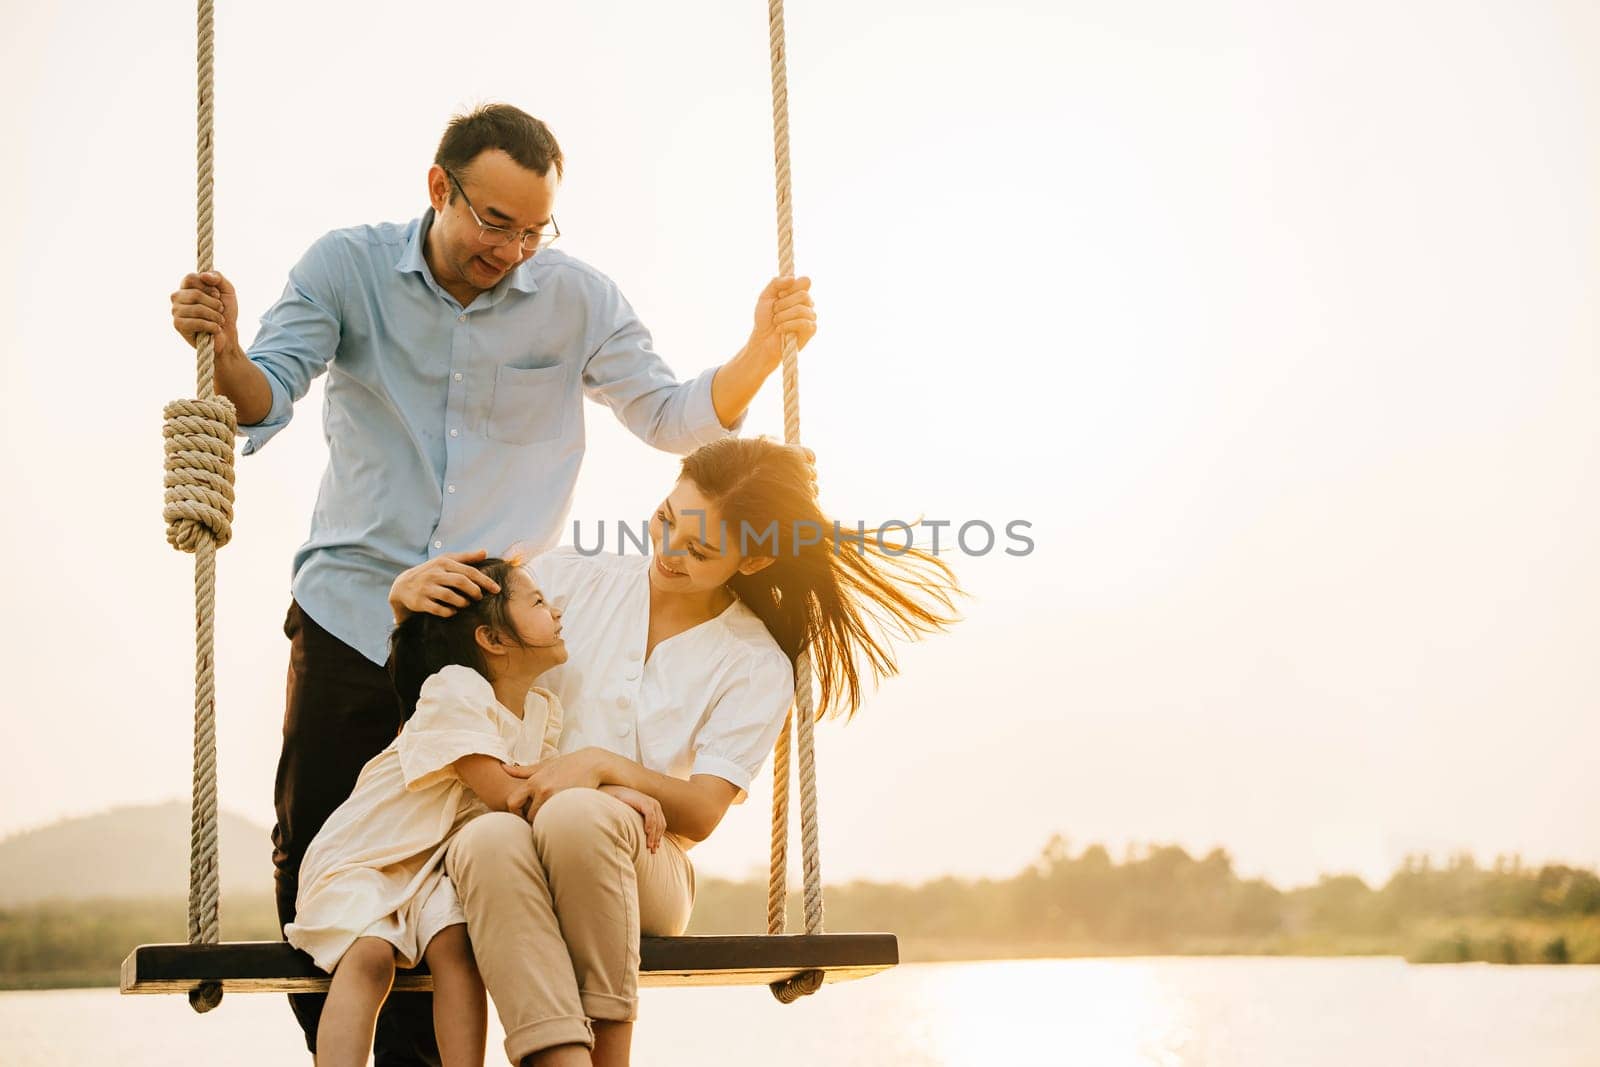 Asian family swinging on a swing in a serene nature setting by Sorapop